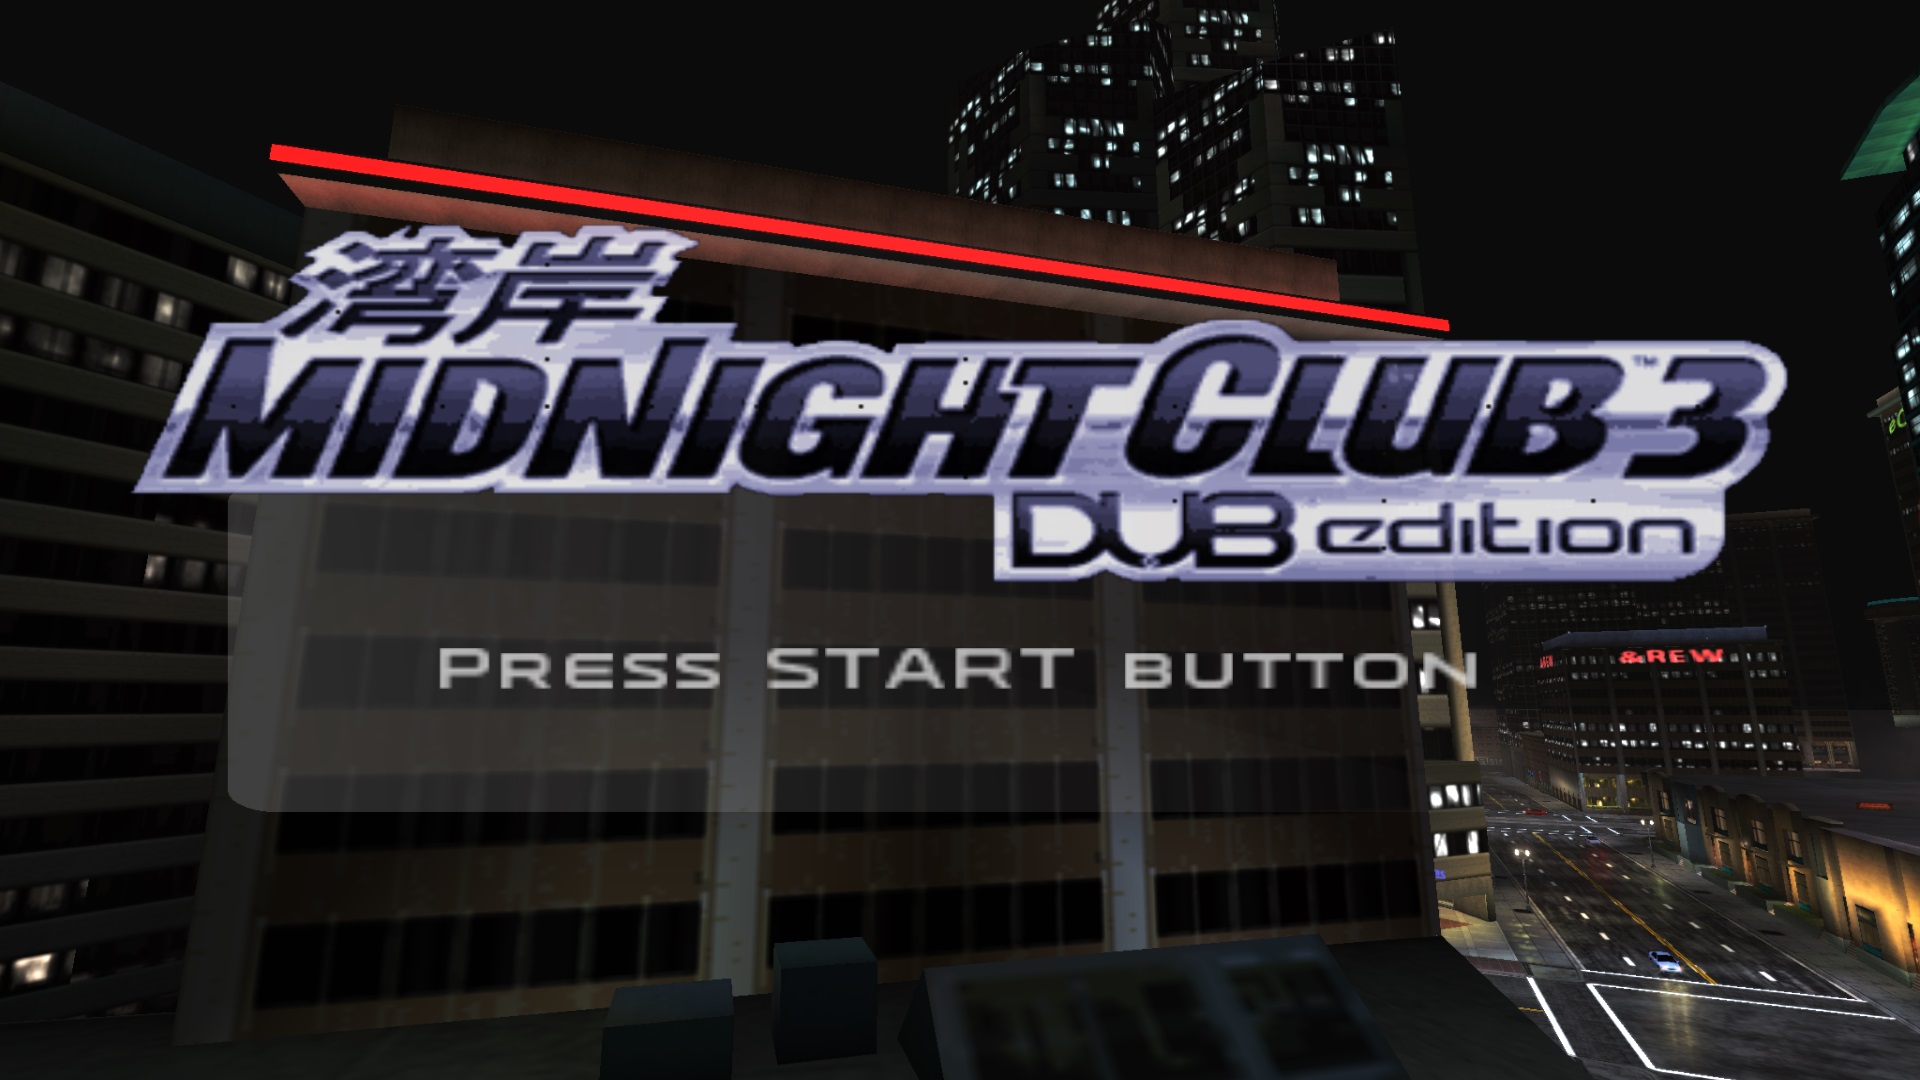 midnight club los angeles pc download completo tpb